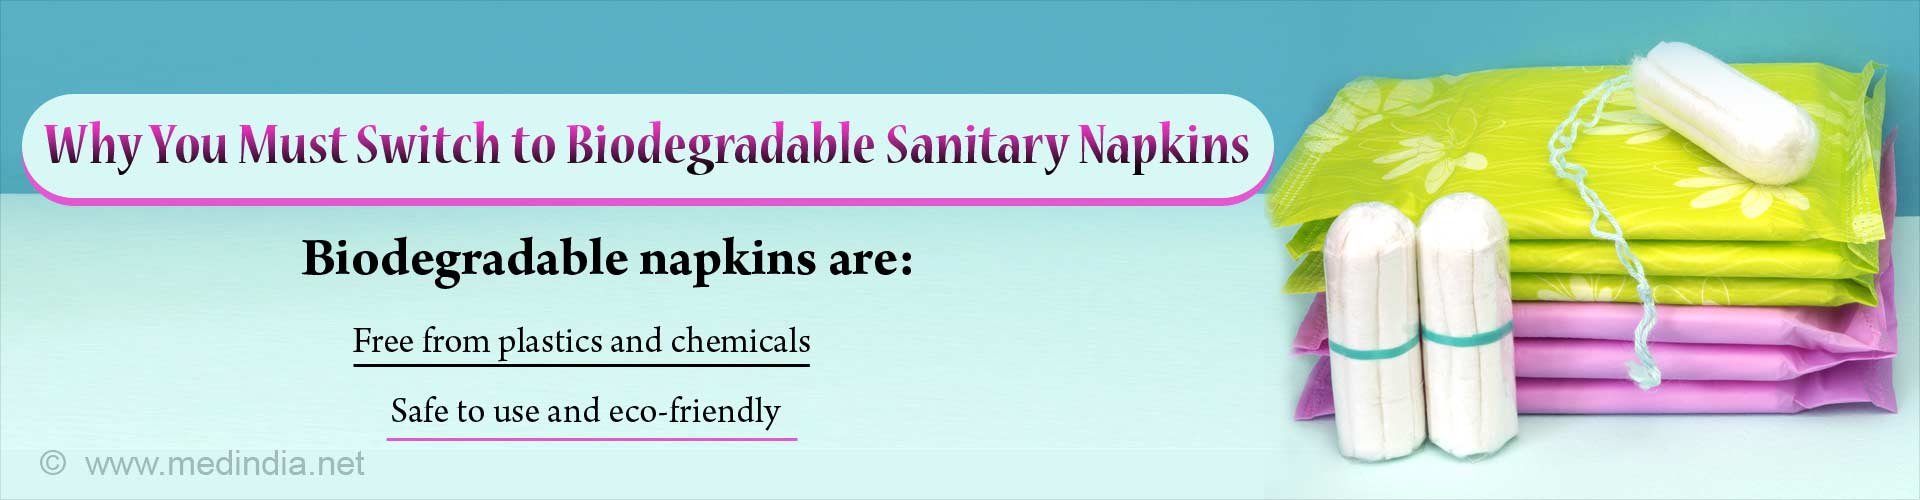 Why you must switch to biodegradable sanitary napkins. Biodegradable napkins are: Free from plastics and chemicals. Safe to use and eco-friendly.